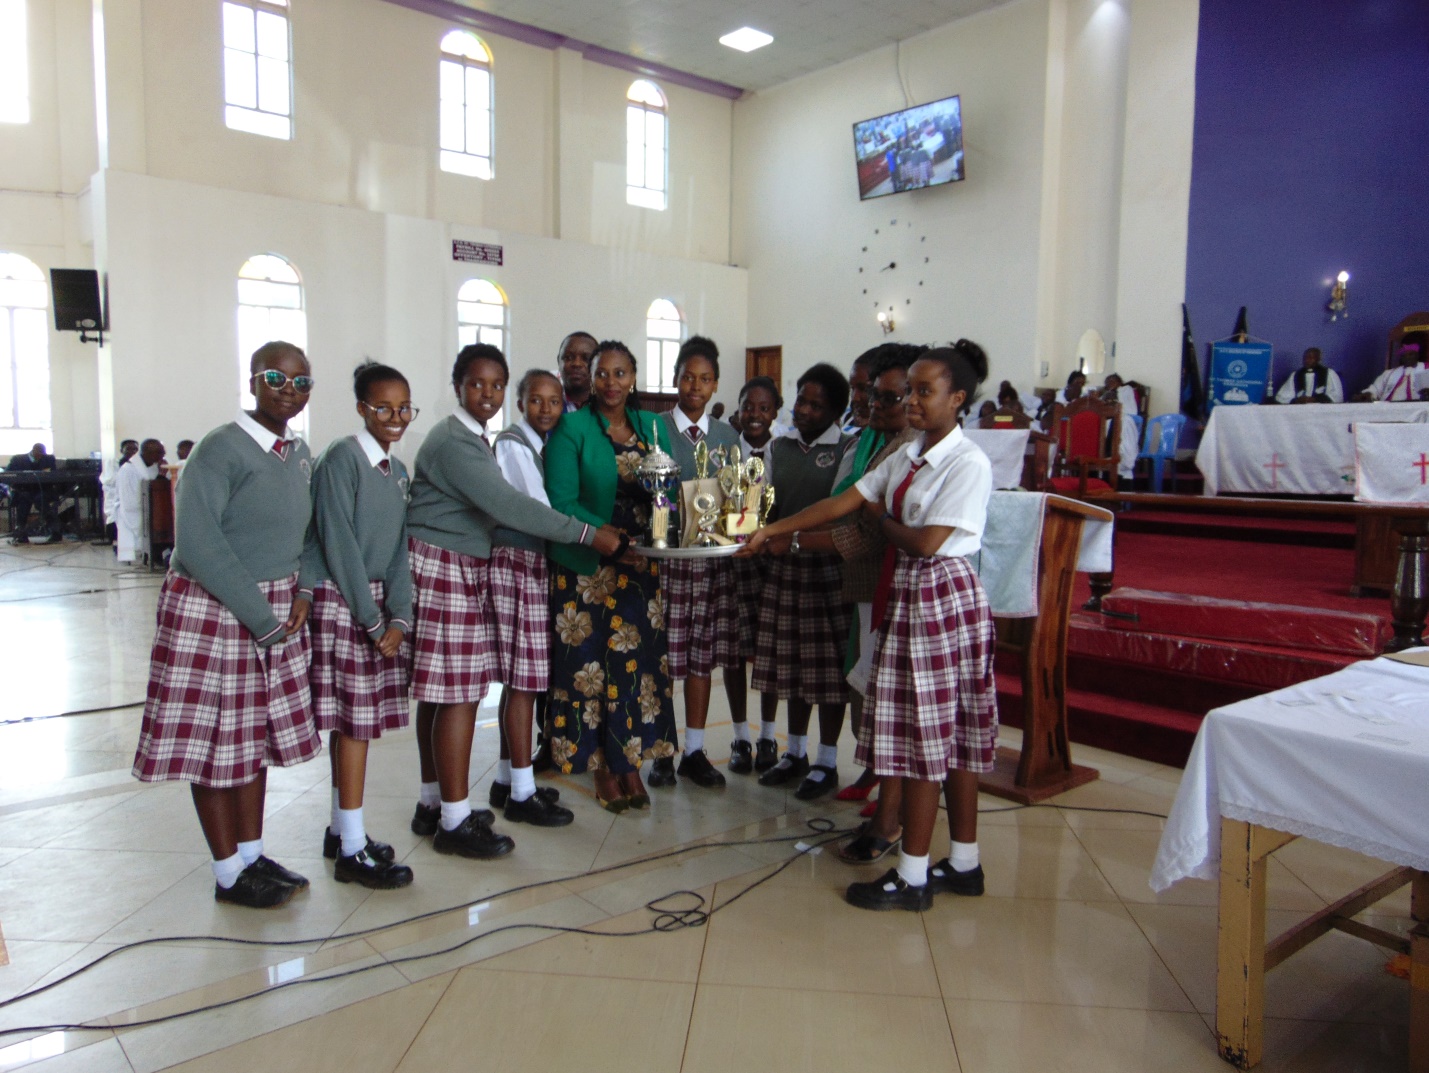 MADAM MARY MUTHONI MURIUKI (P.S. MINISTRY OF HEALTH) PRESENTING TROPHIES TO KABARE GIRLS HIGH SCHOOL DURING THE DIOCESAN EDUCATION DAY.